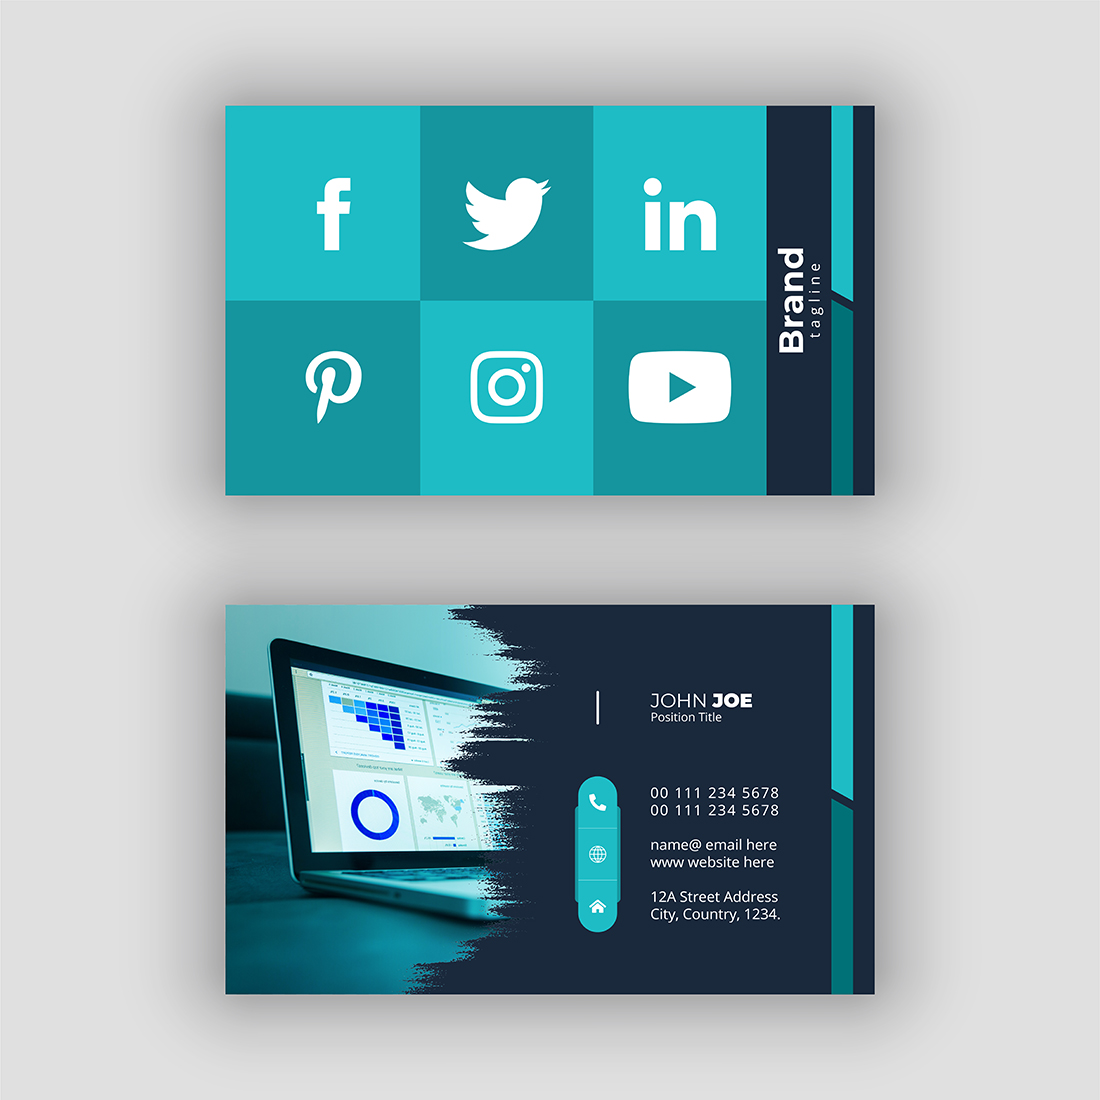 Social Media Business Card cover image.